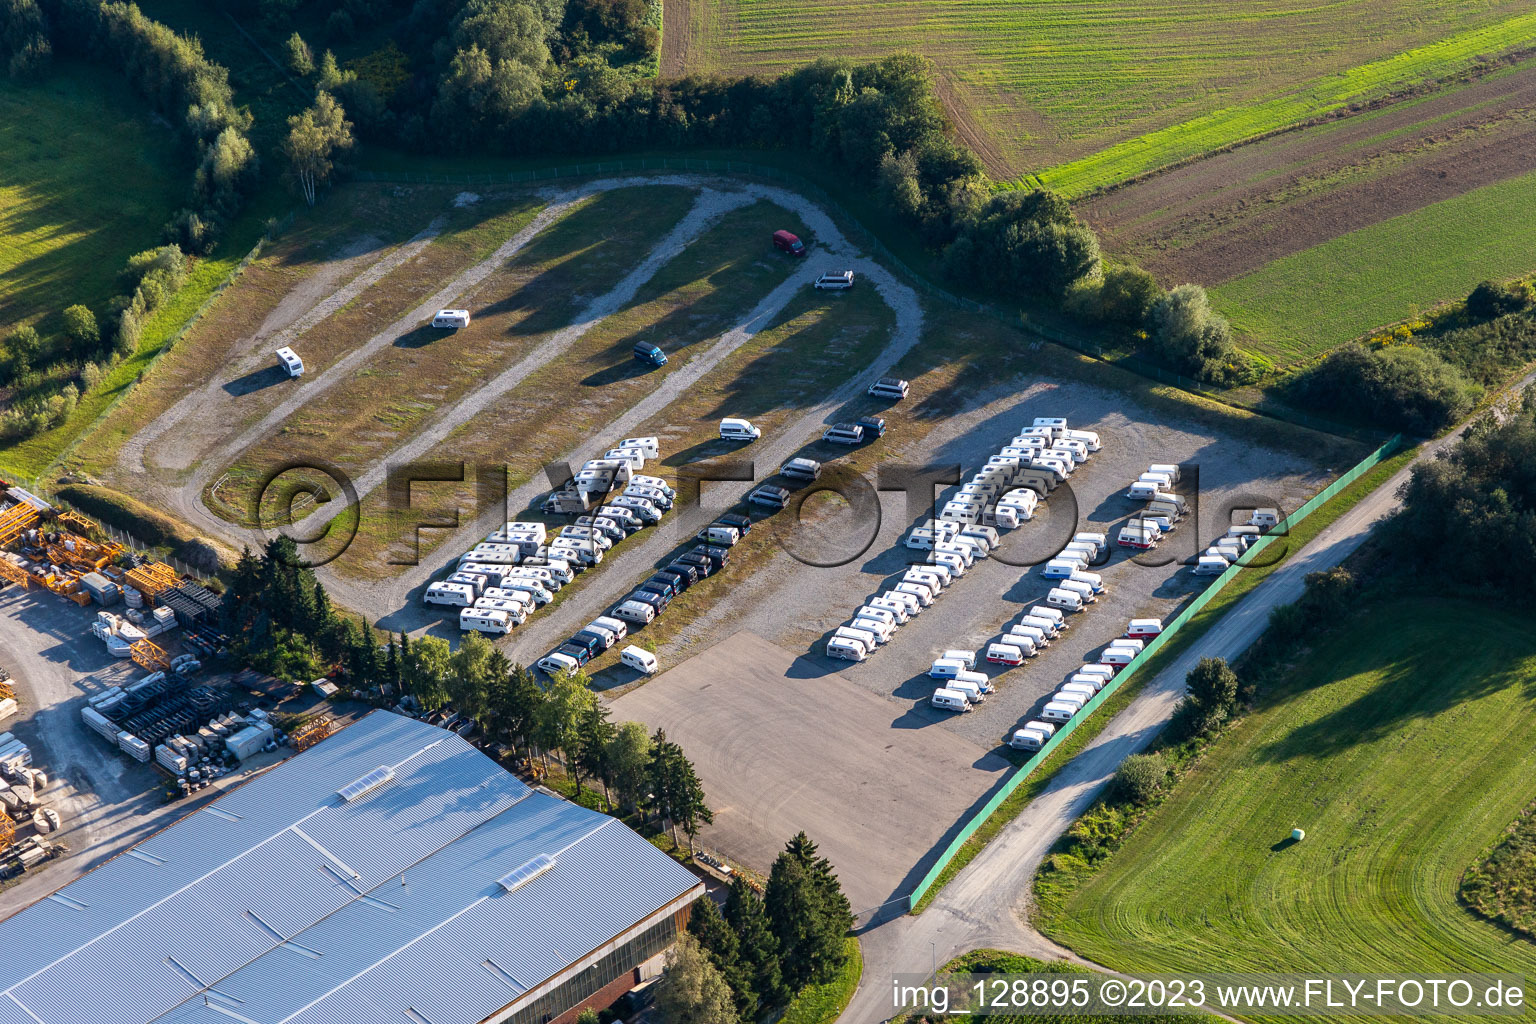 Buildings and production halls on the vehicle construction site of Hymer Reisemobile GmbH in Bad Waldsee in the state Baden-Wuerttemberg, Germany seen from above